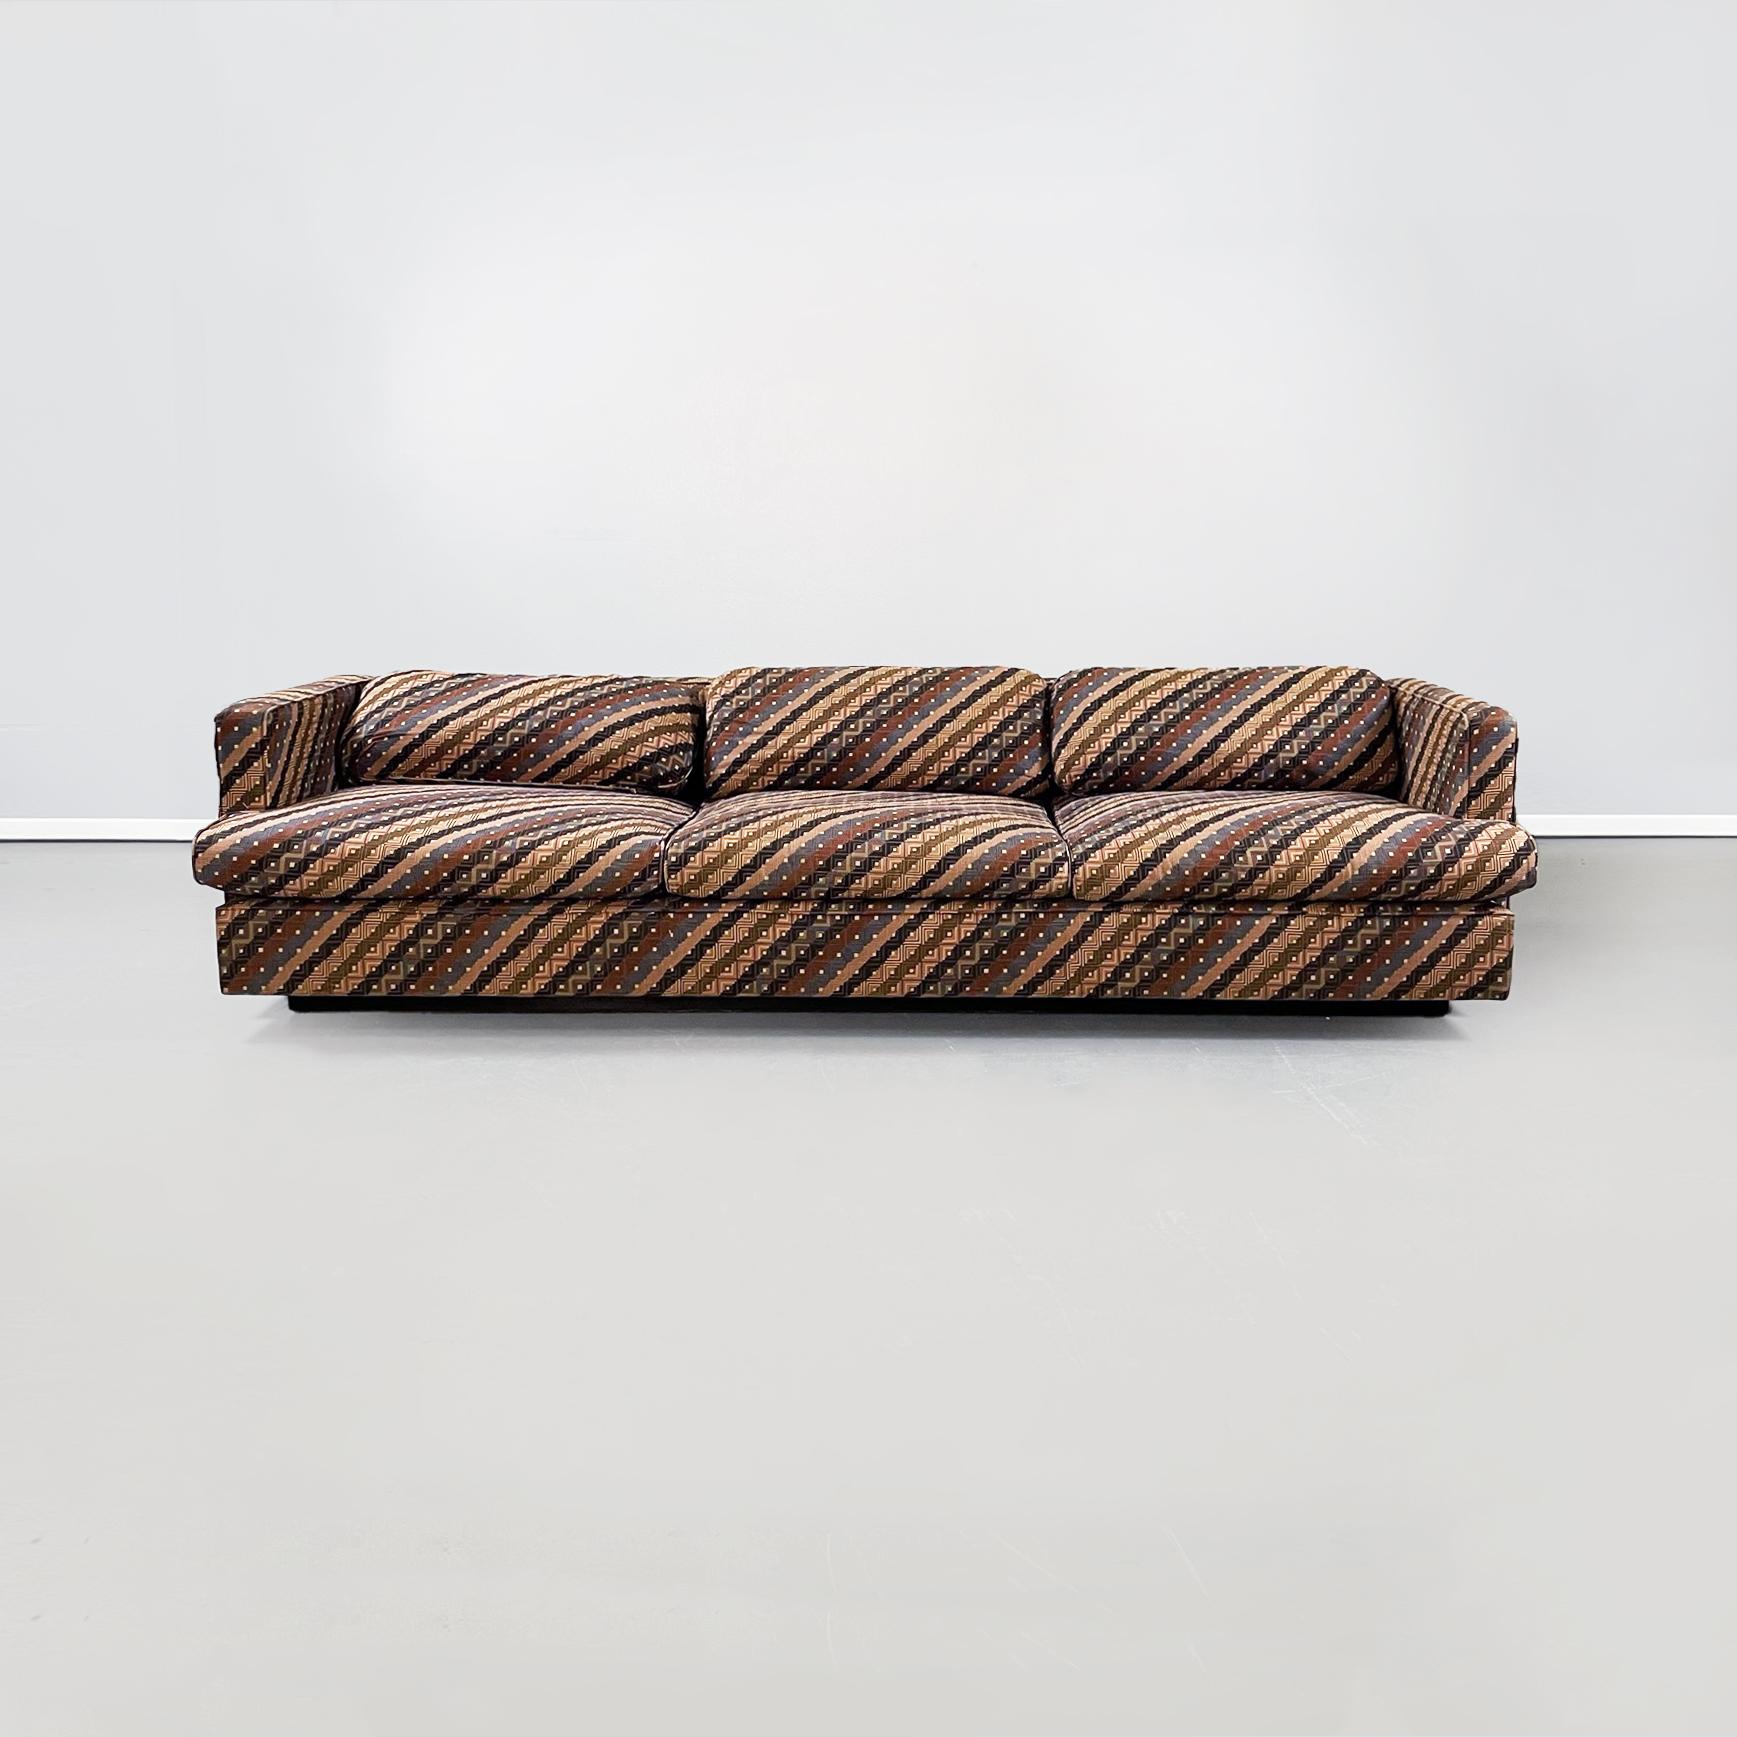 Italian mid-century 3 seat sofa with Missoni fabric by Saporiti Italia, 1980s
The sofa upholstered and covered in Missoni's fabric with colorful stripe and square patterns. The sofa has 3 seats with rectangular seats and back cushions. It has